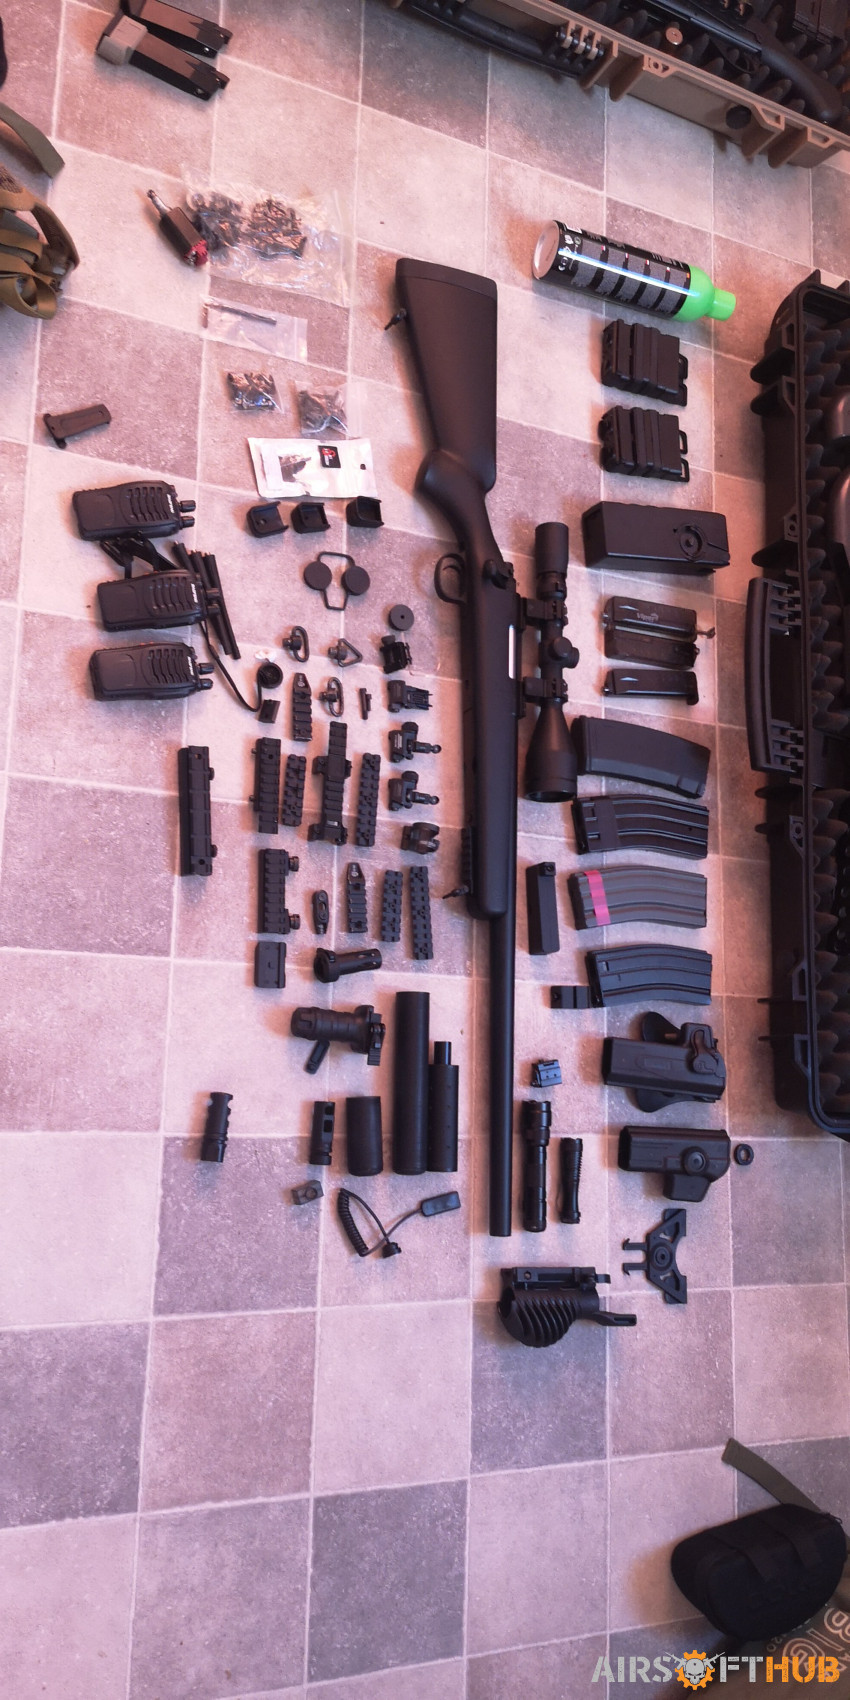 Airsoft bundle *updated* - Used airsoft equipment